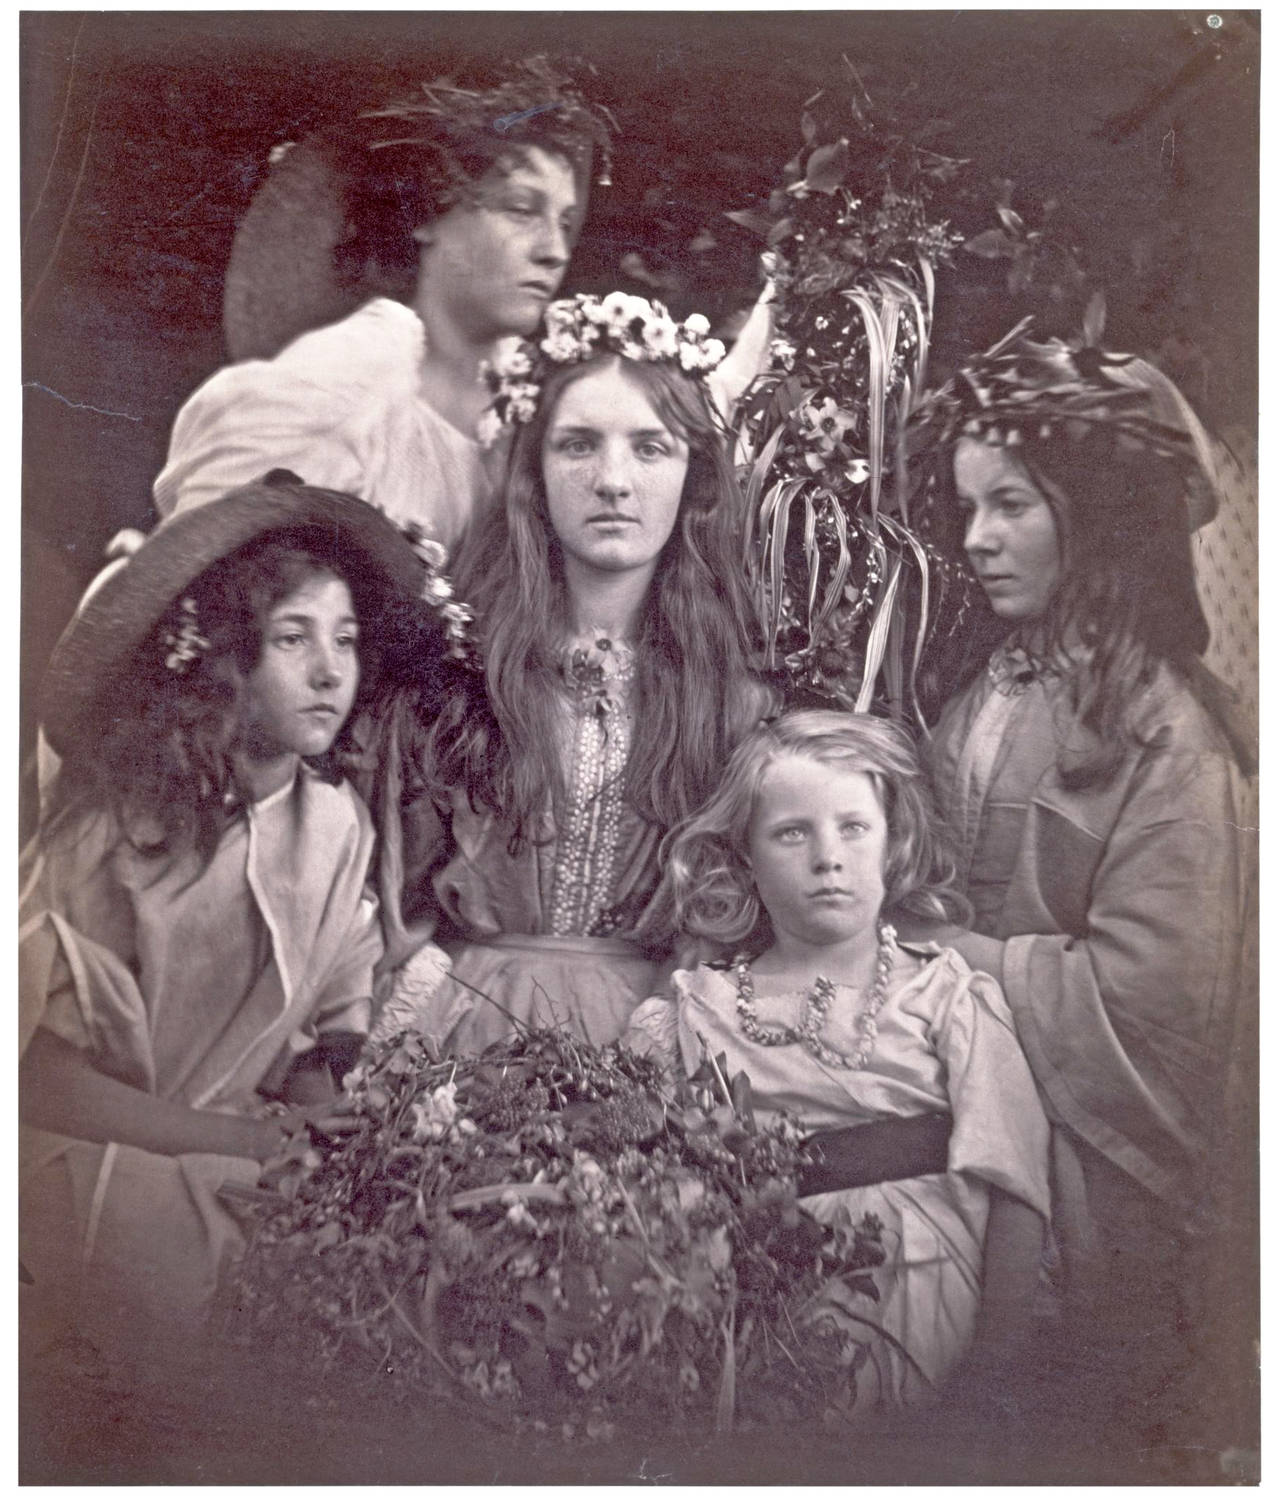 May Day, photograph, by Julia Margaret Cameron, 1866, England. Museum no. 933-1913. © Victoria and Albert Museum, London